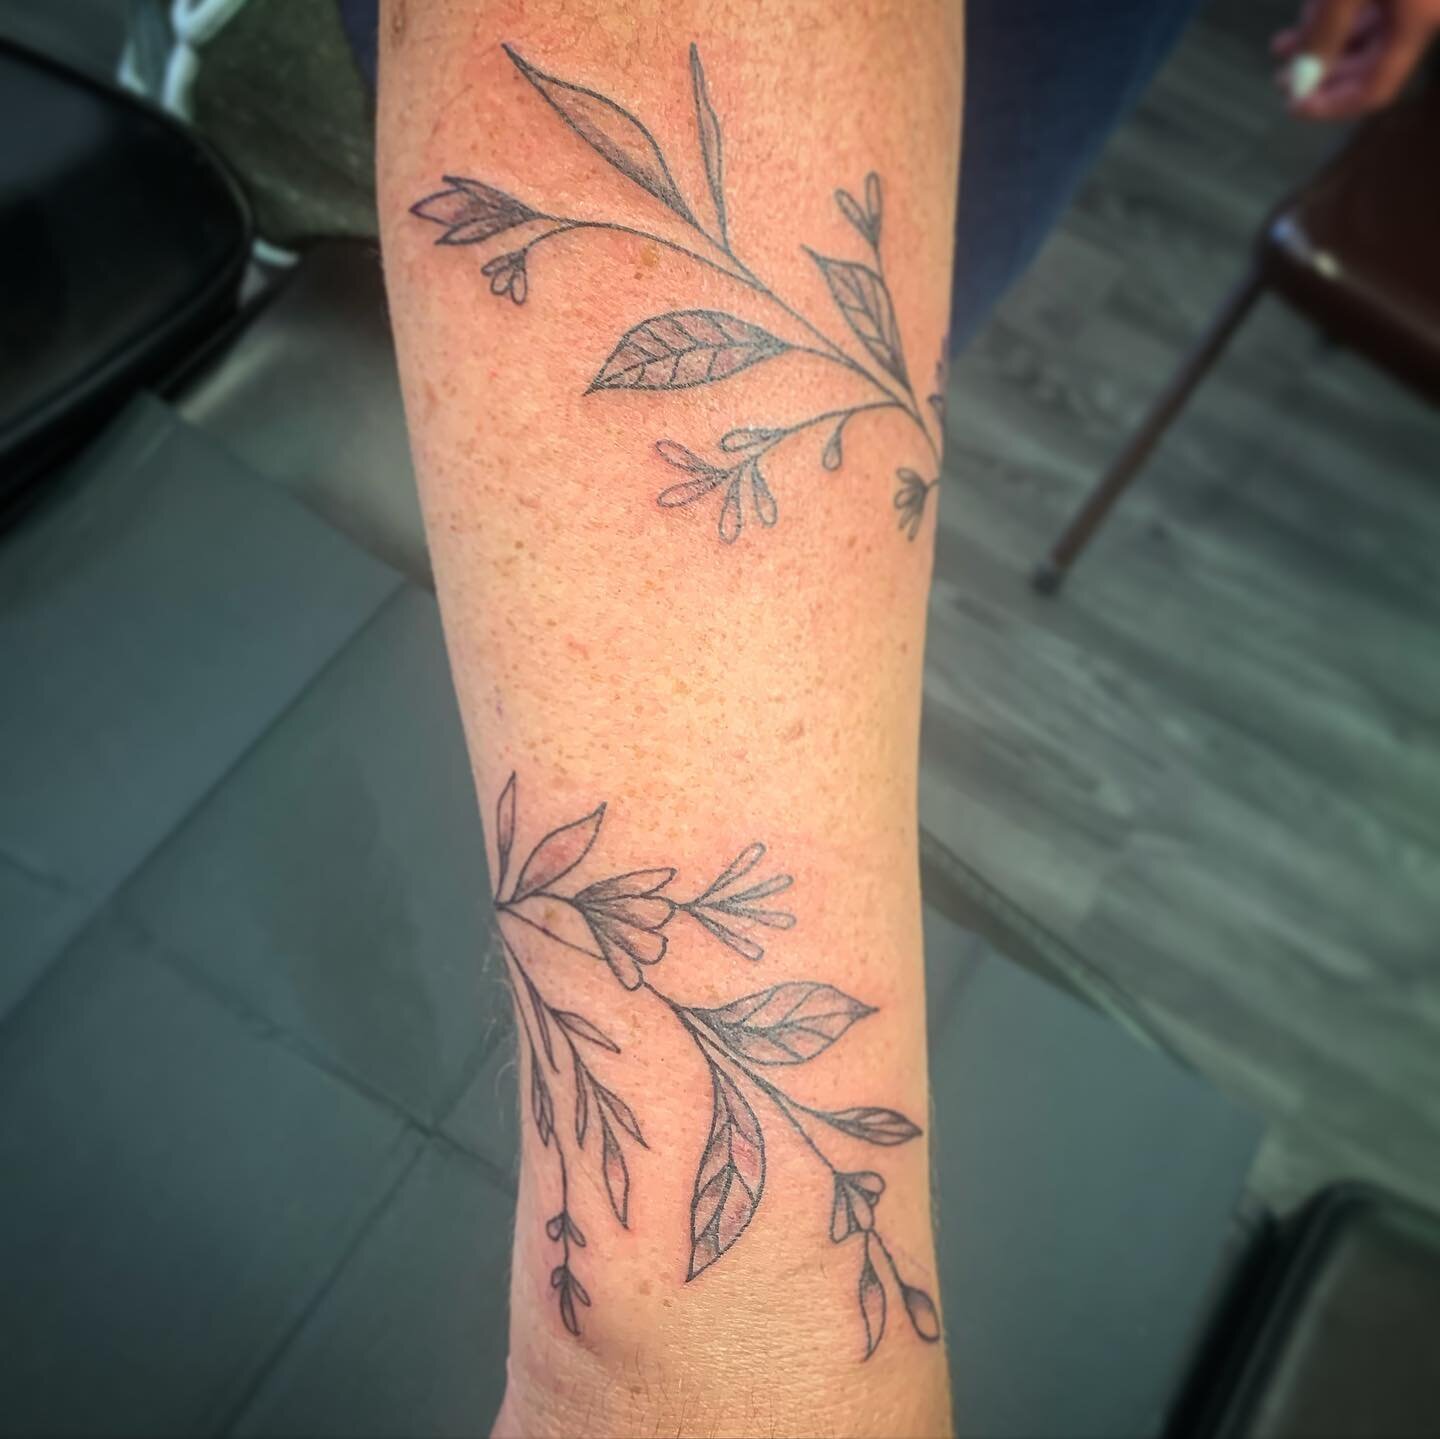 Sarah stopped by last week to start on these flowers with vines on her lower arm. I will be seeing her again soon!😛😆#mayamodification #flower #flowersleeve #vinetattoo #tattoo #tattoos #tattoosleeve #blackandgreytattoo